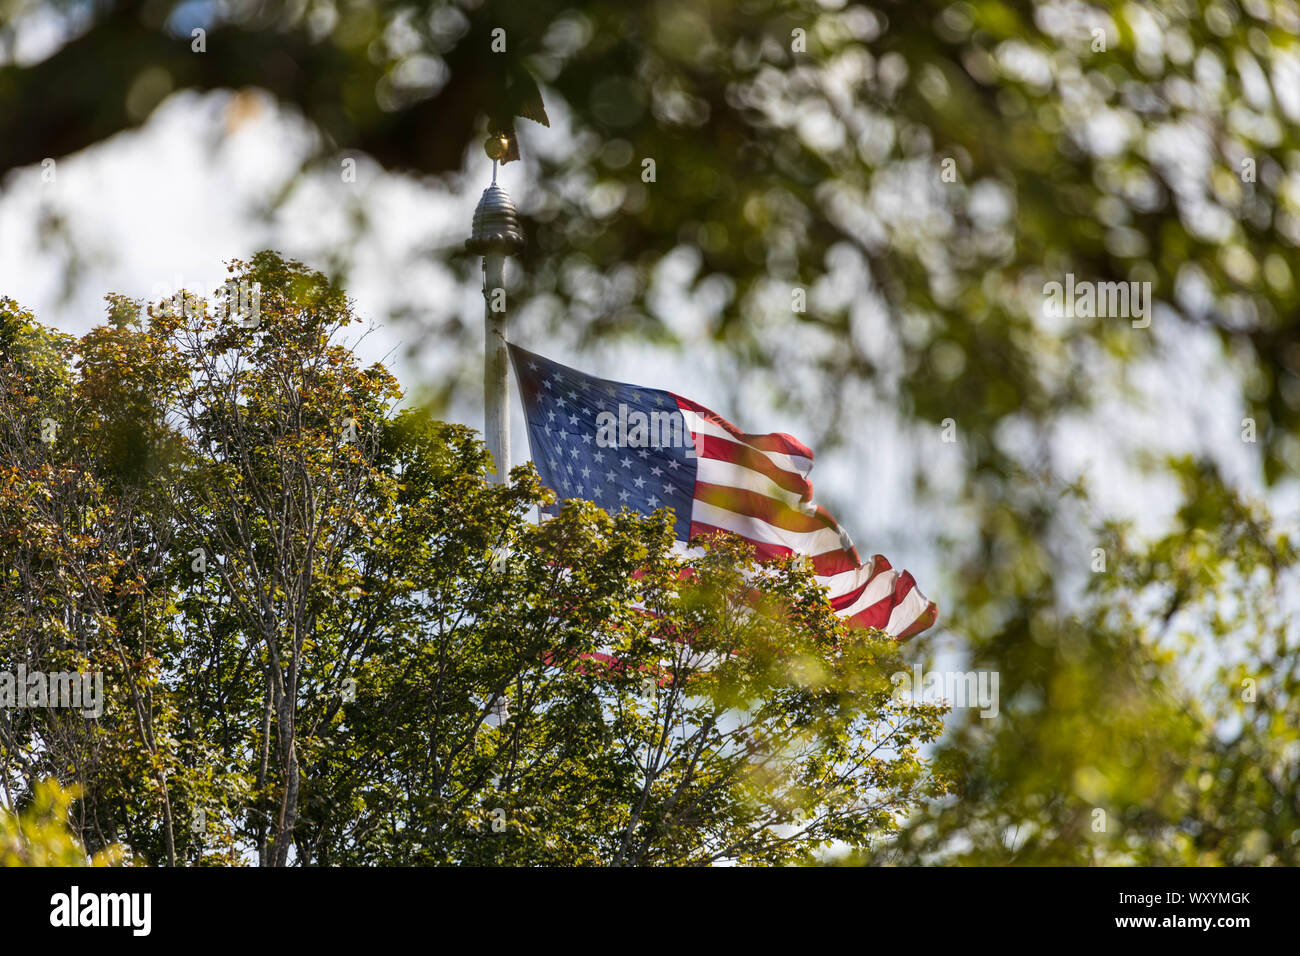 American flag partially obscured by trees in park Stock Photo